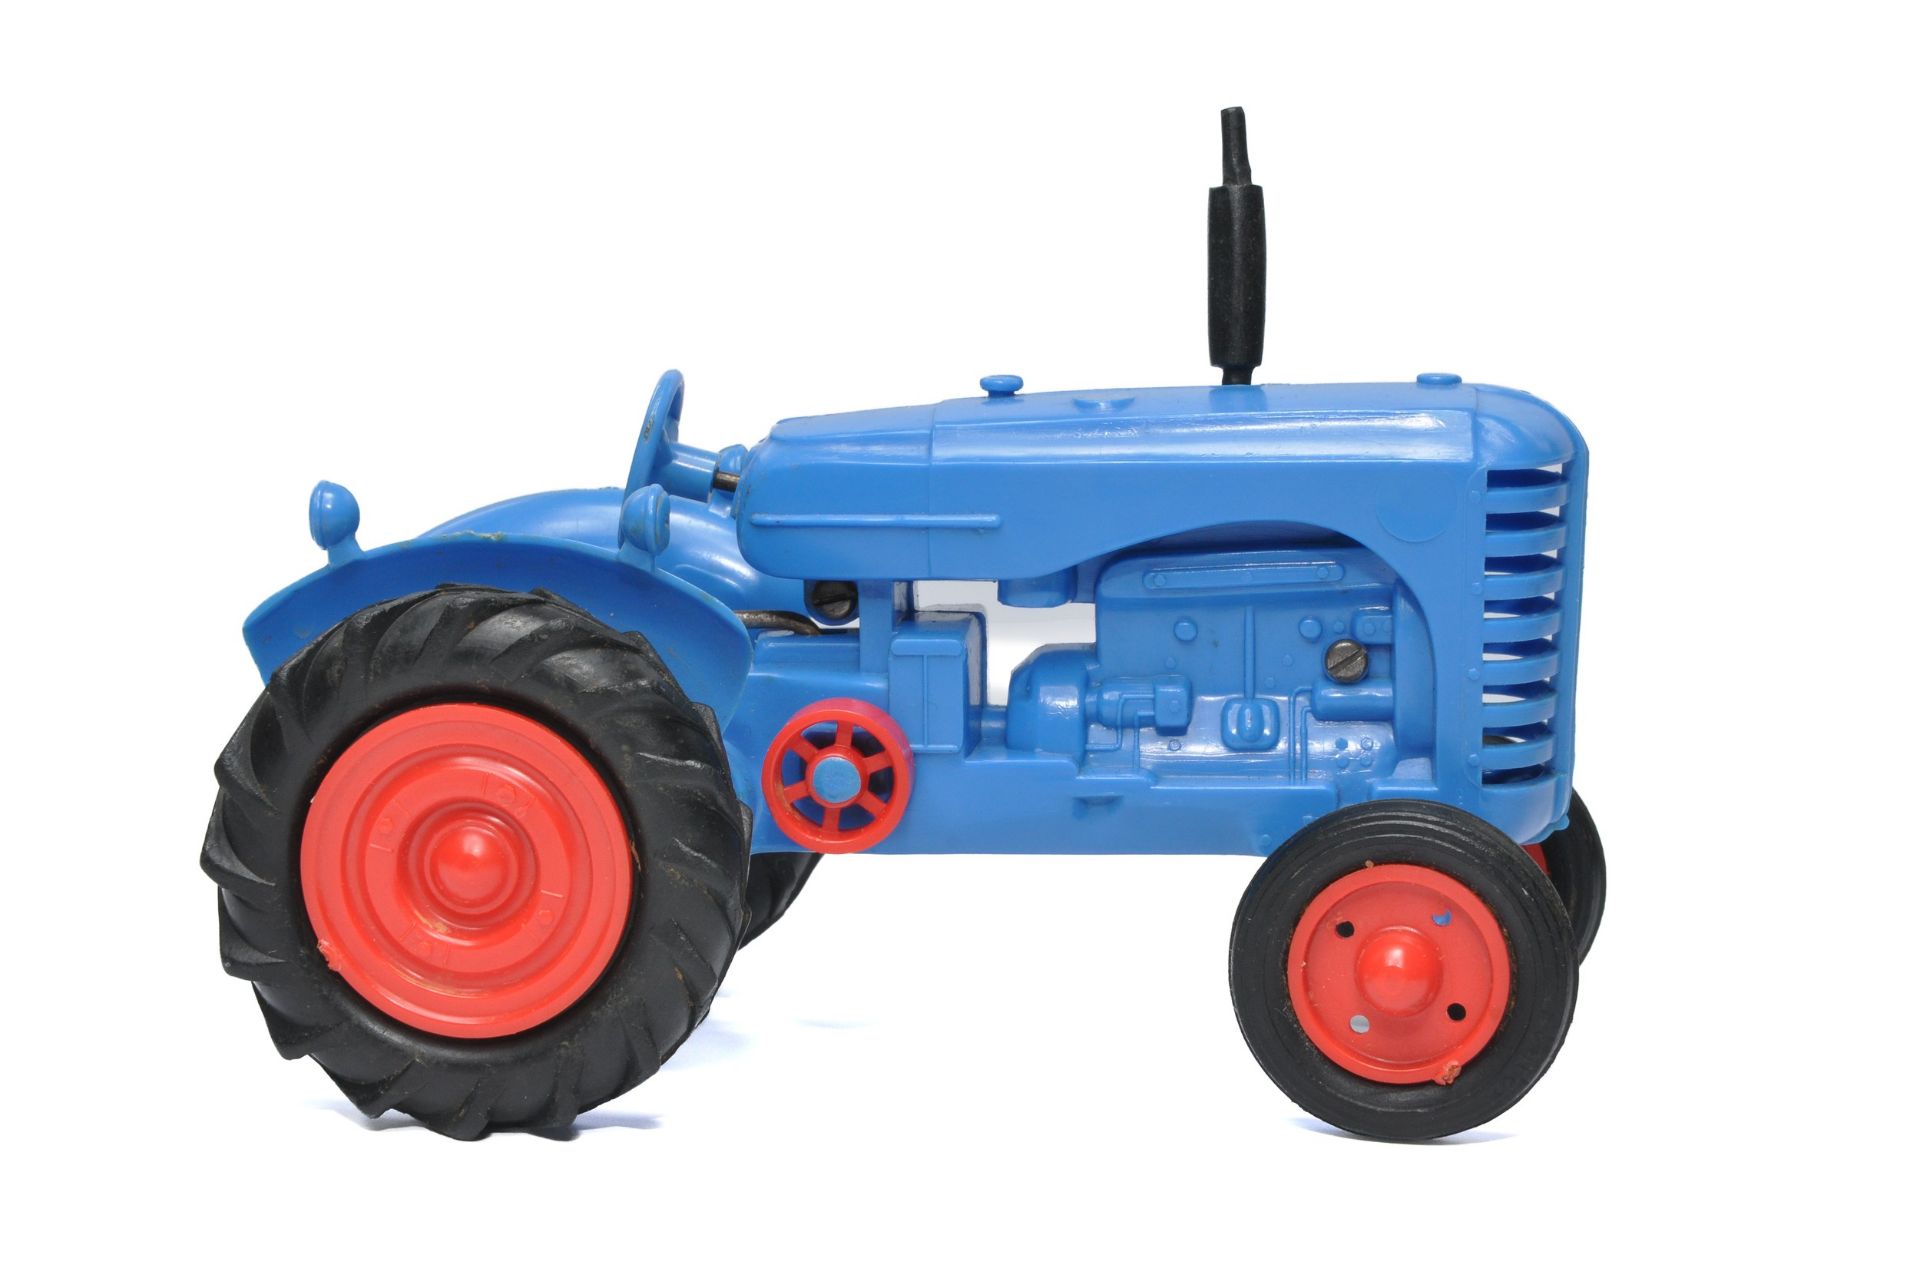 Raphael Lipkin (England) approx 1/24 plastic scale model of the Massey Harris Tractor in blue. - Image 3 of 4